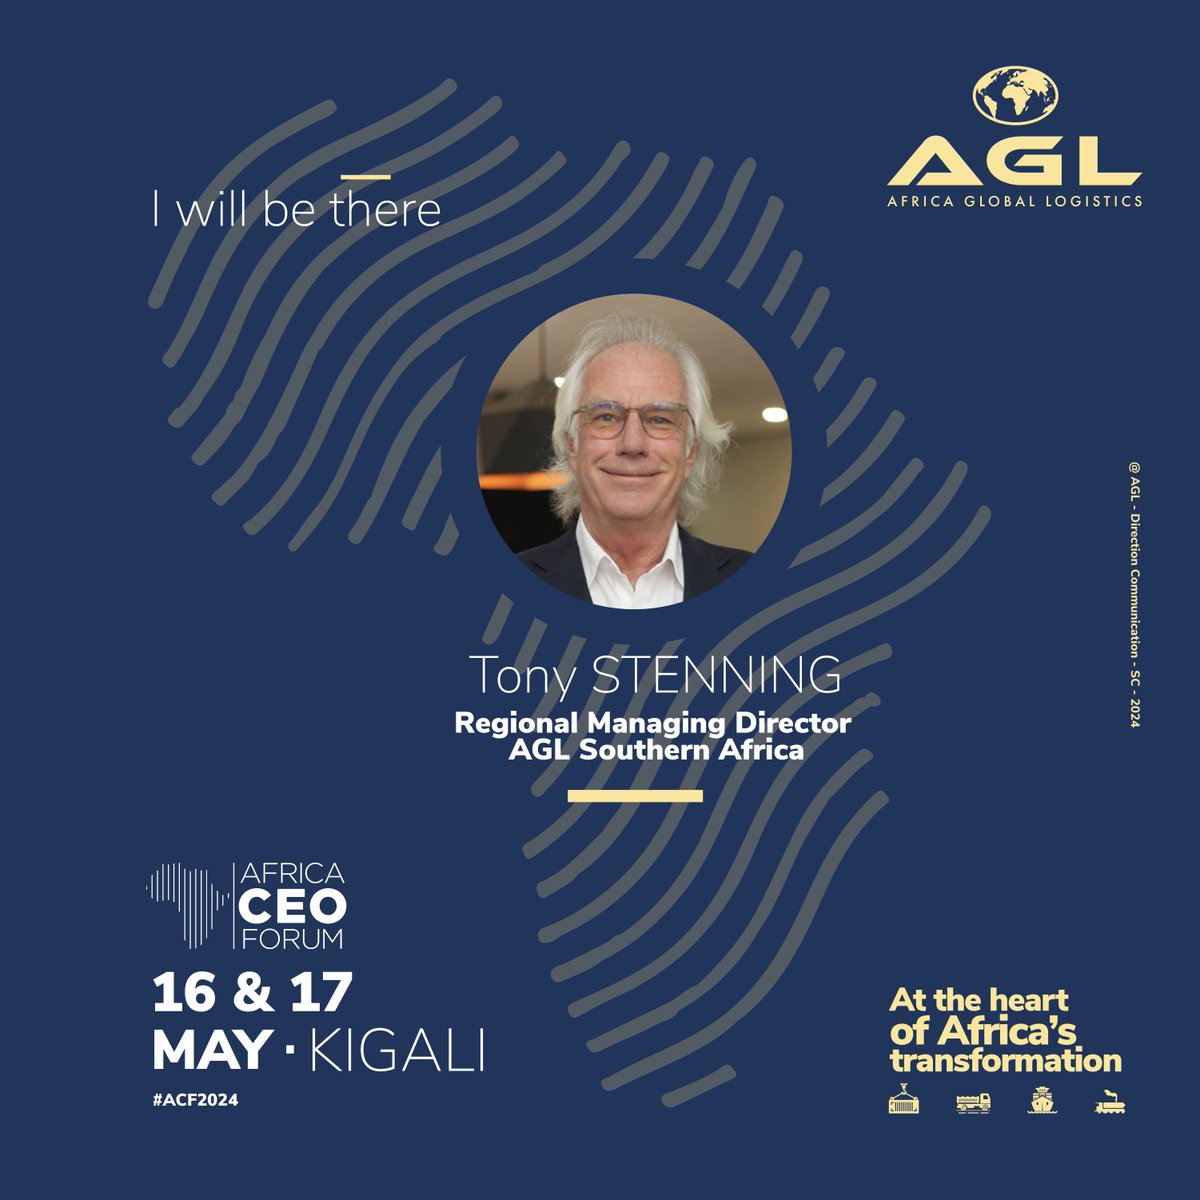 🎙️ Tony Stenning, AGL Regional Managing Director for Southern Africa, will be speaking at the @africaceoforum in Kigali. 💎 AGL - @aglgroup_, Diamond partner of #ACF2024 #AGL #AfricaCEOForum #MiningInfrastructures #AfricaTransformation #ConnectingAfrica